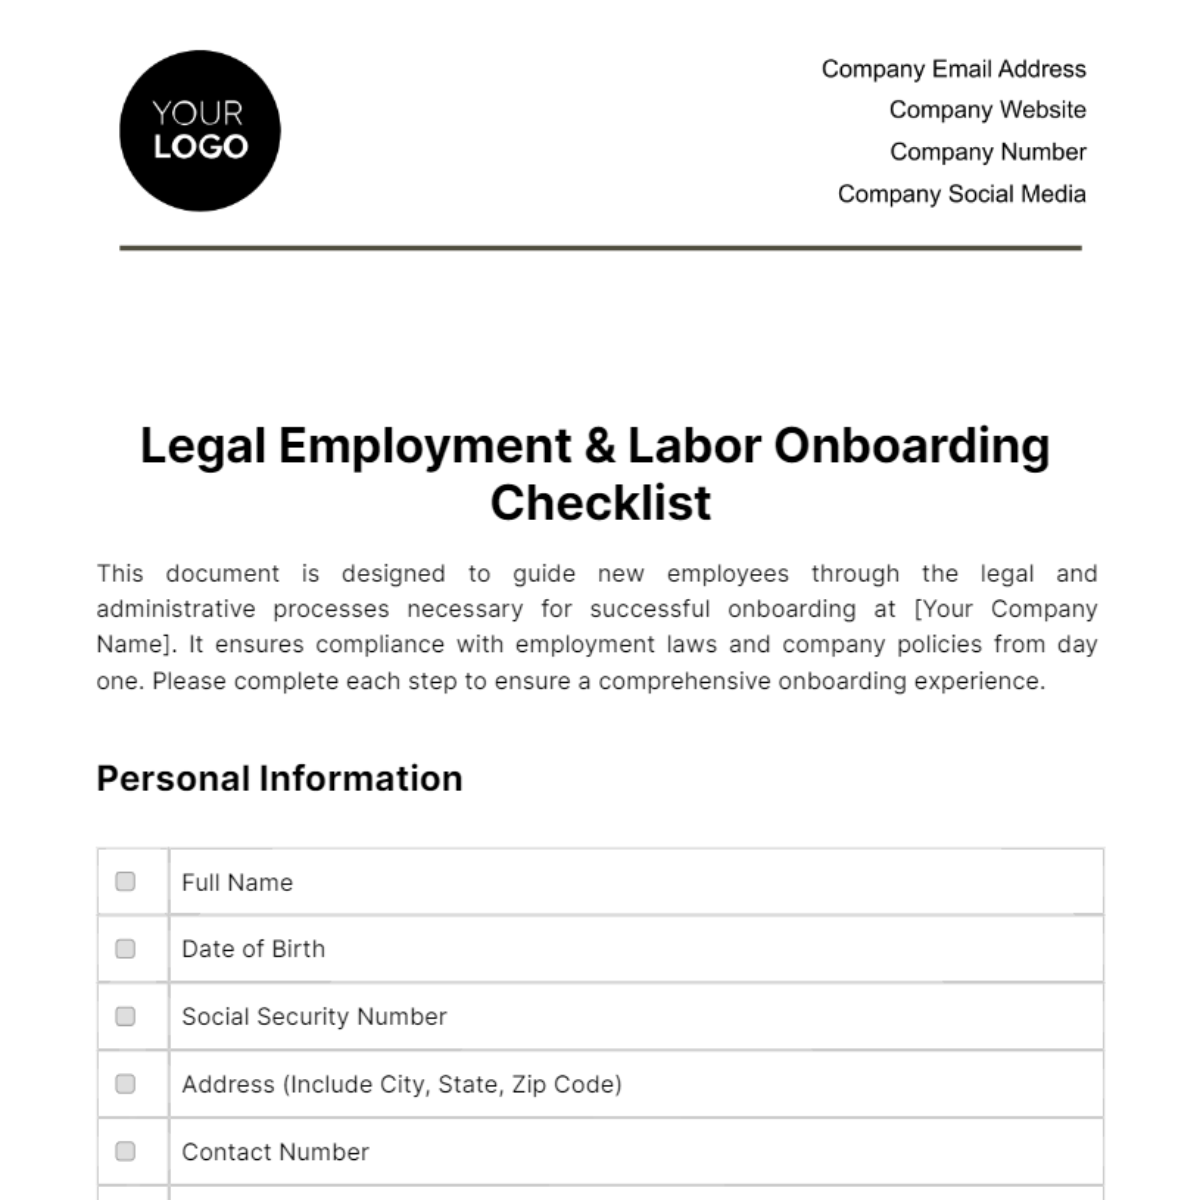 Free Legal Employment & Labor Onboarding Checklist Template